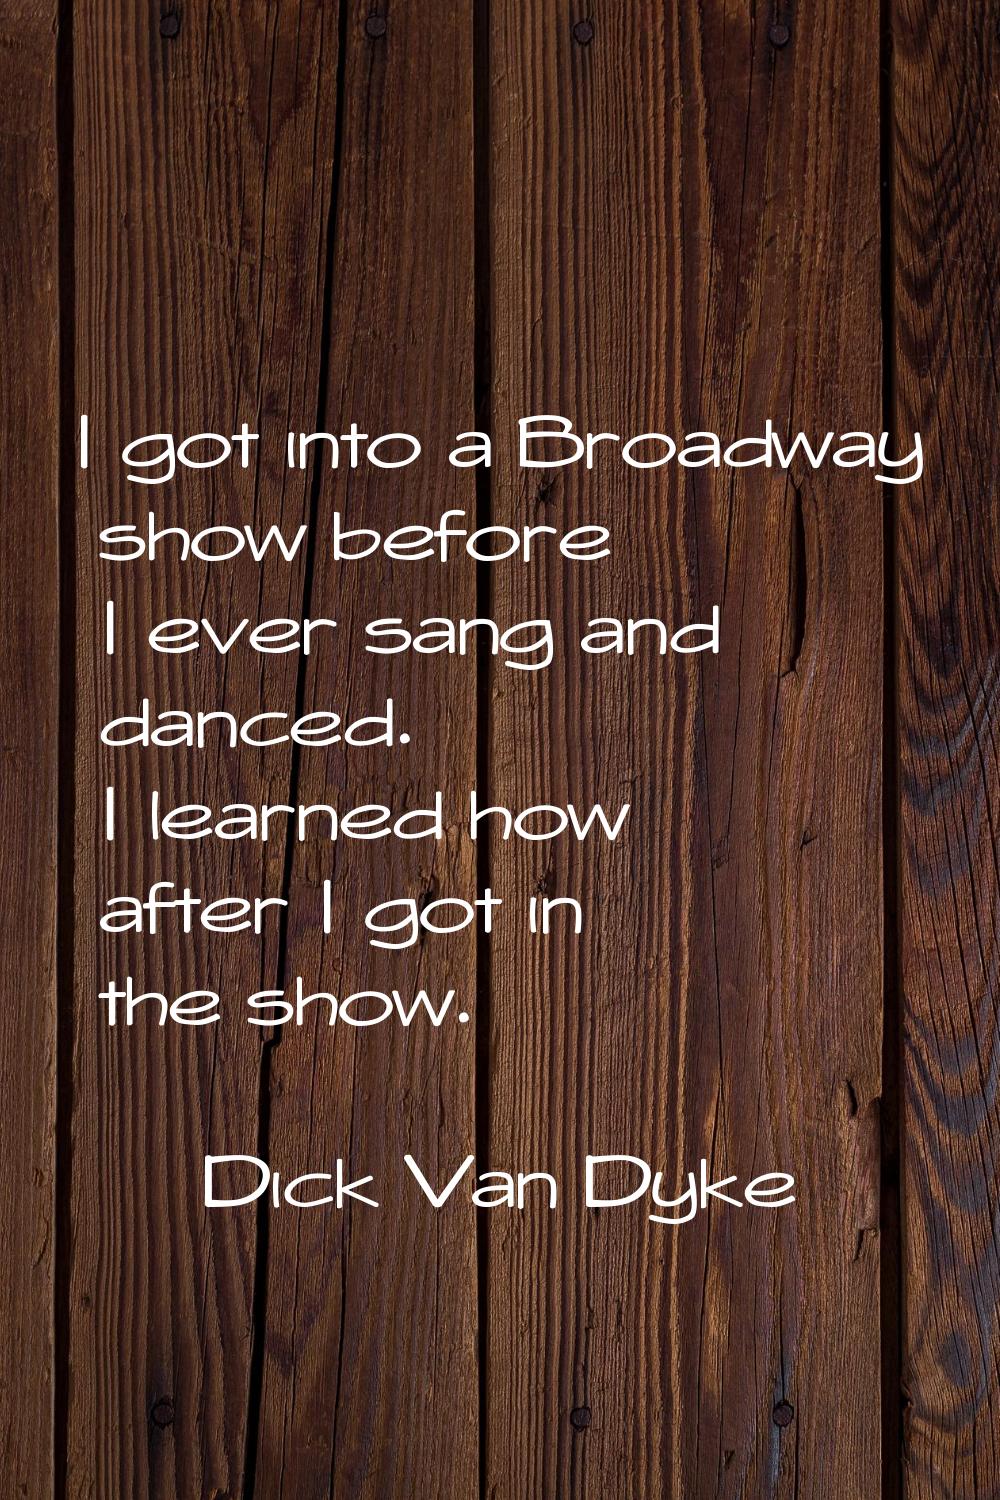 I got into a Broadway show before I ever sang and danced. I learned how after I got in the show.